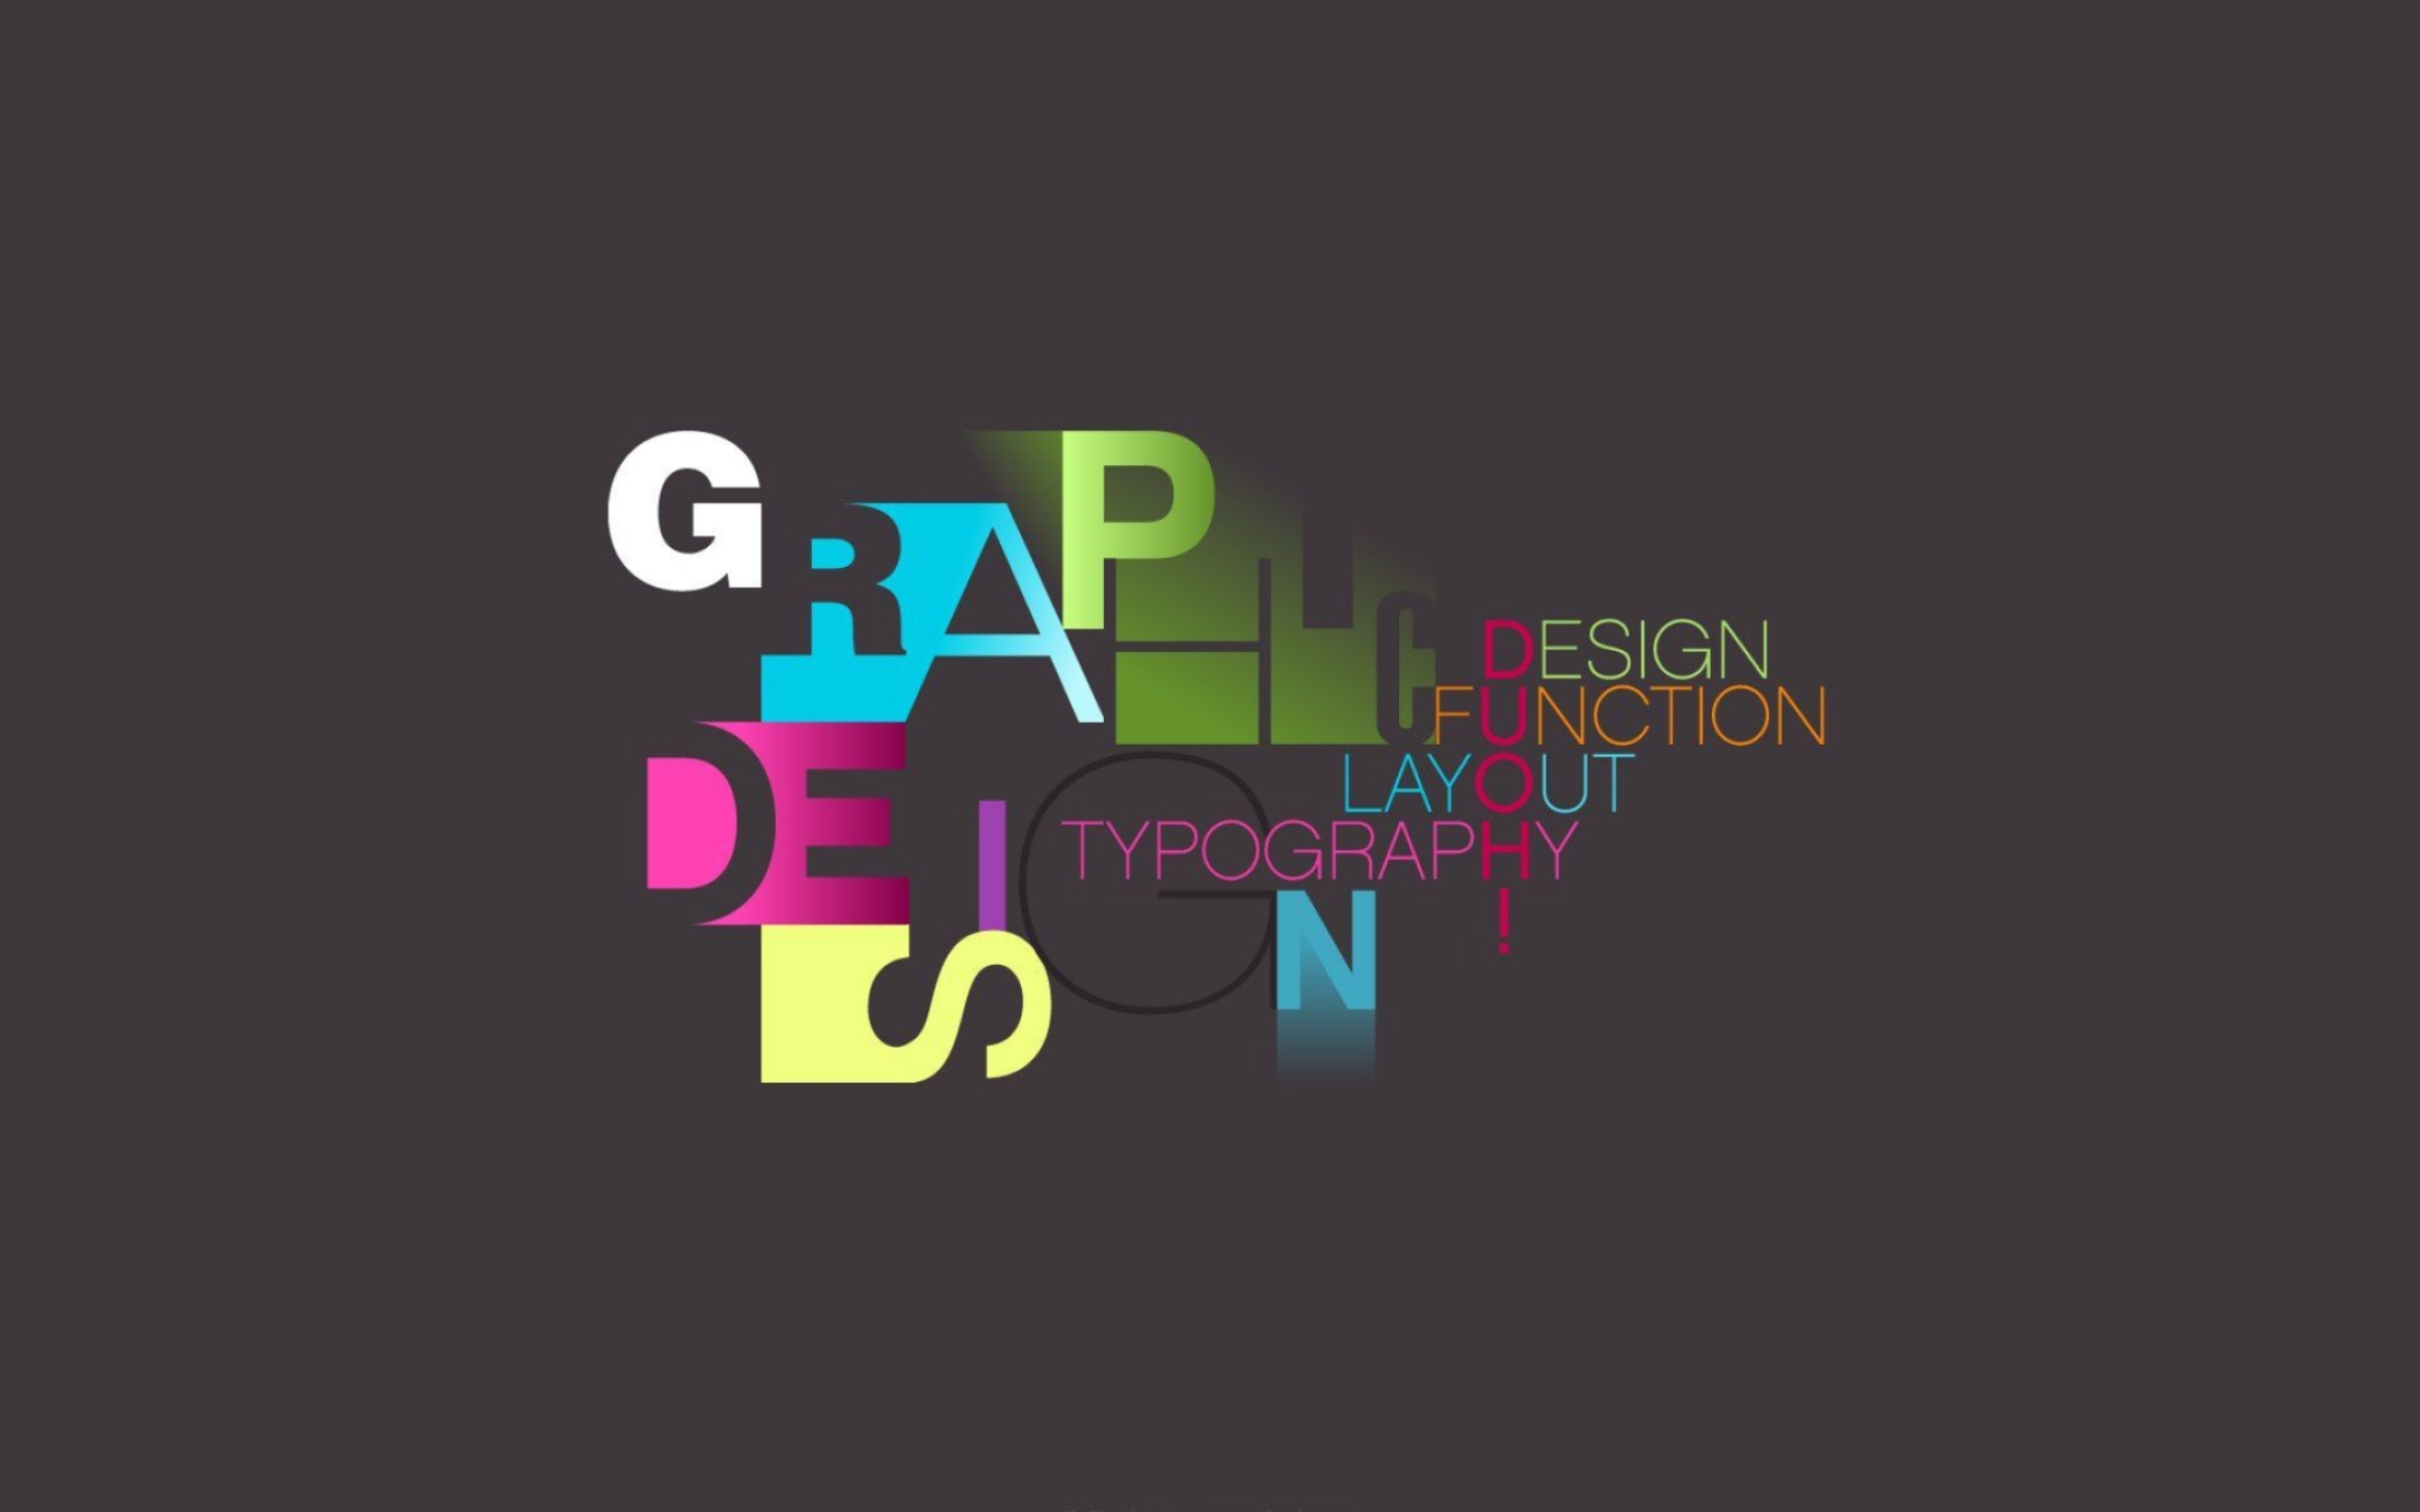 Graphic: Web design, Function, Layout, Typography, Digital art, Visual elements. 2560x1600 HD Background.